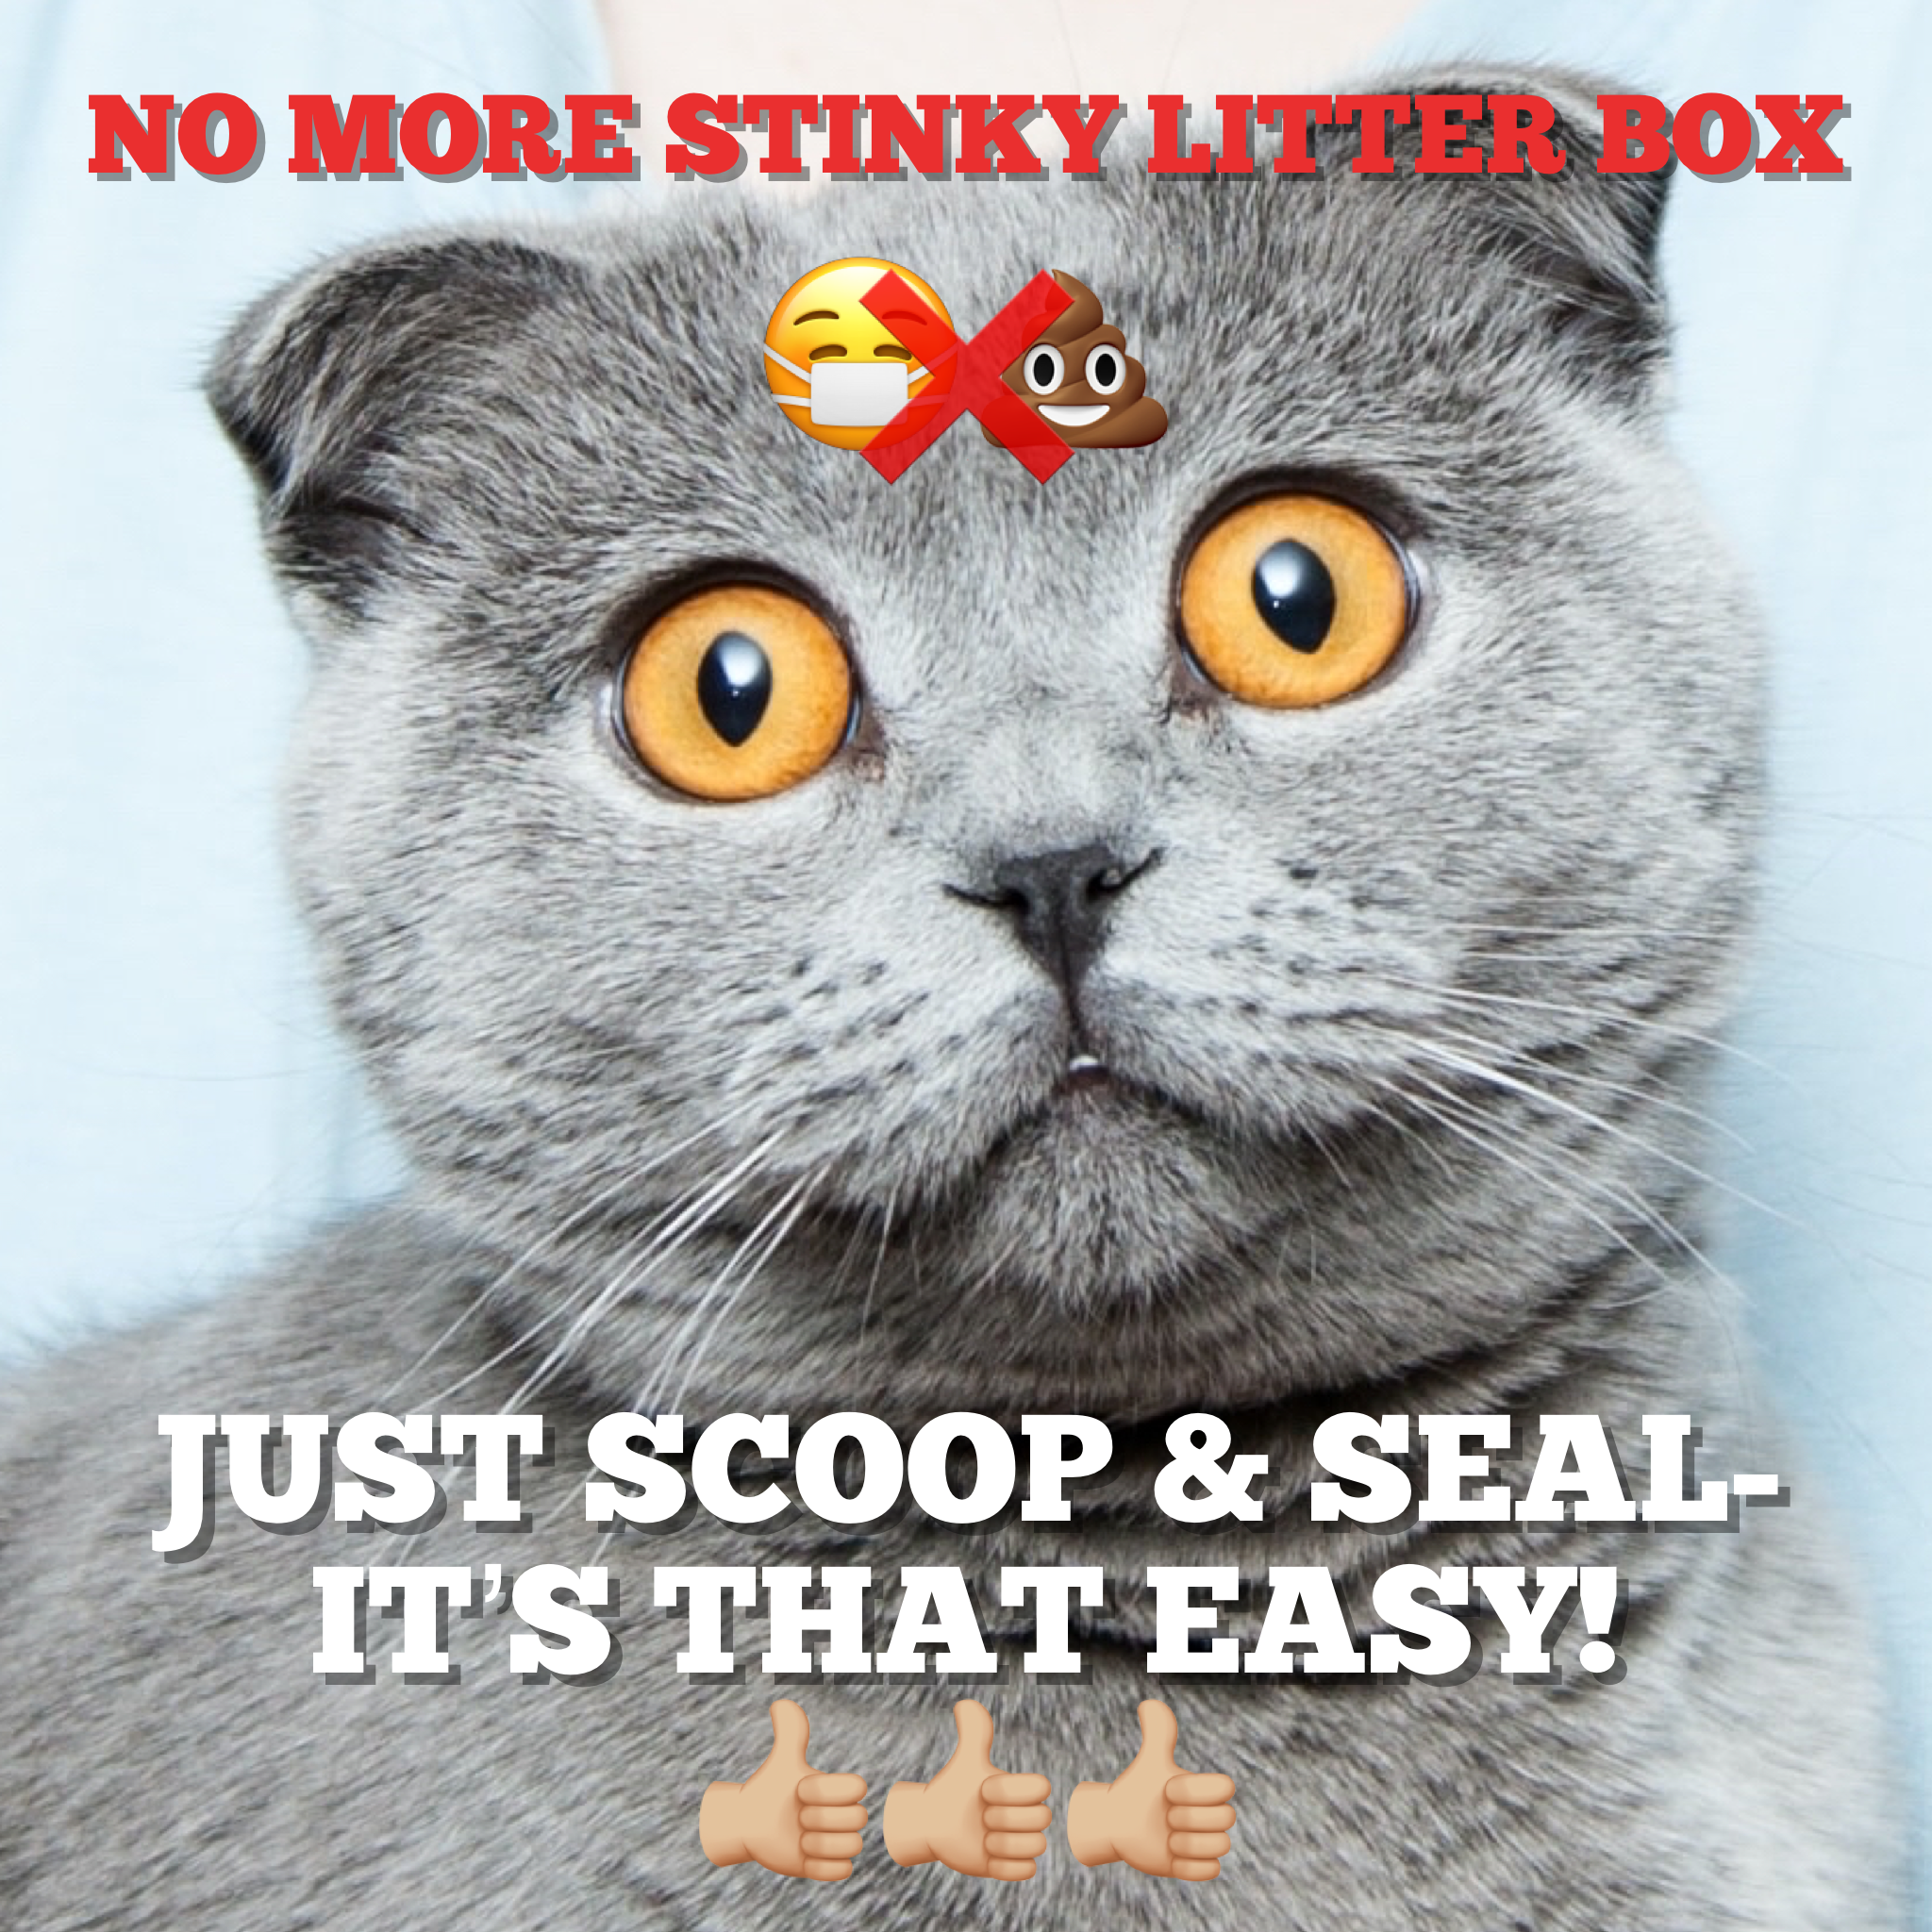 Self Bagging Litter Scoop with FREE 21 Odor Seal Bags & Every Cat litter spray 2 oz